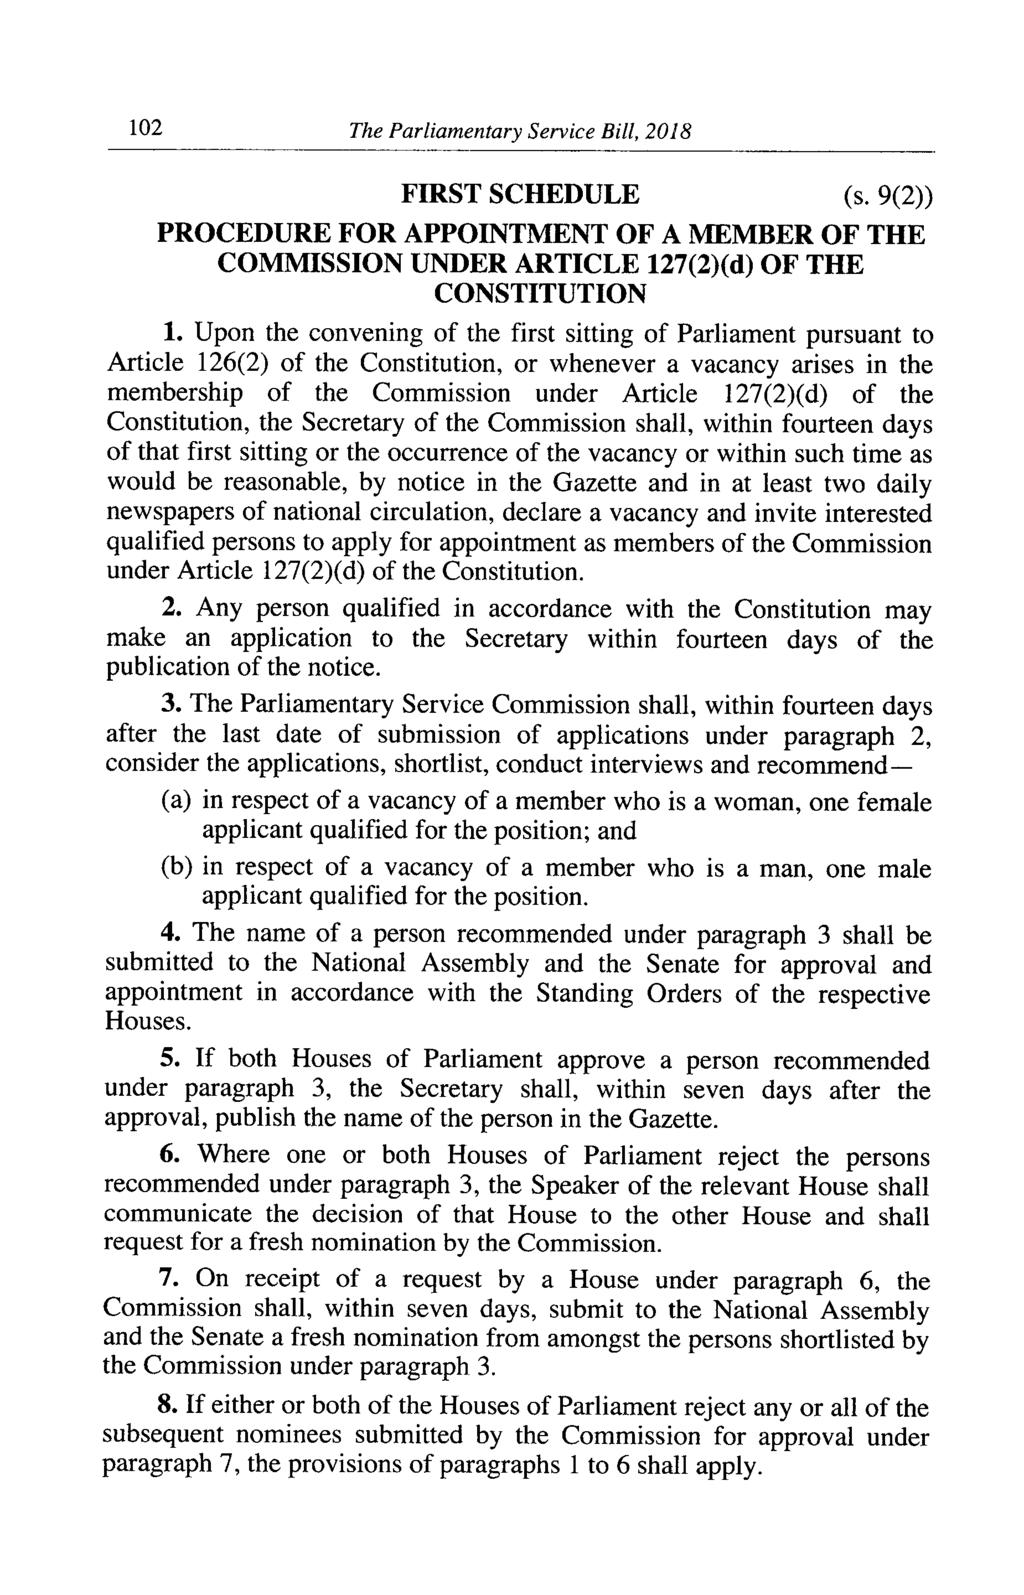 102 The Parliamentary Service Bill, 2018 FIRST SCHEDULE (s. 9(2)) PROCEDURE FOR APPOINTMENT OF A MEMBER OF THE COMMISSION UNDER ARTICLE 127(2)(d) OF THE CONSTITUTION 1.